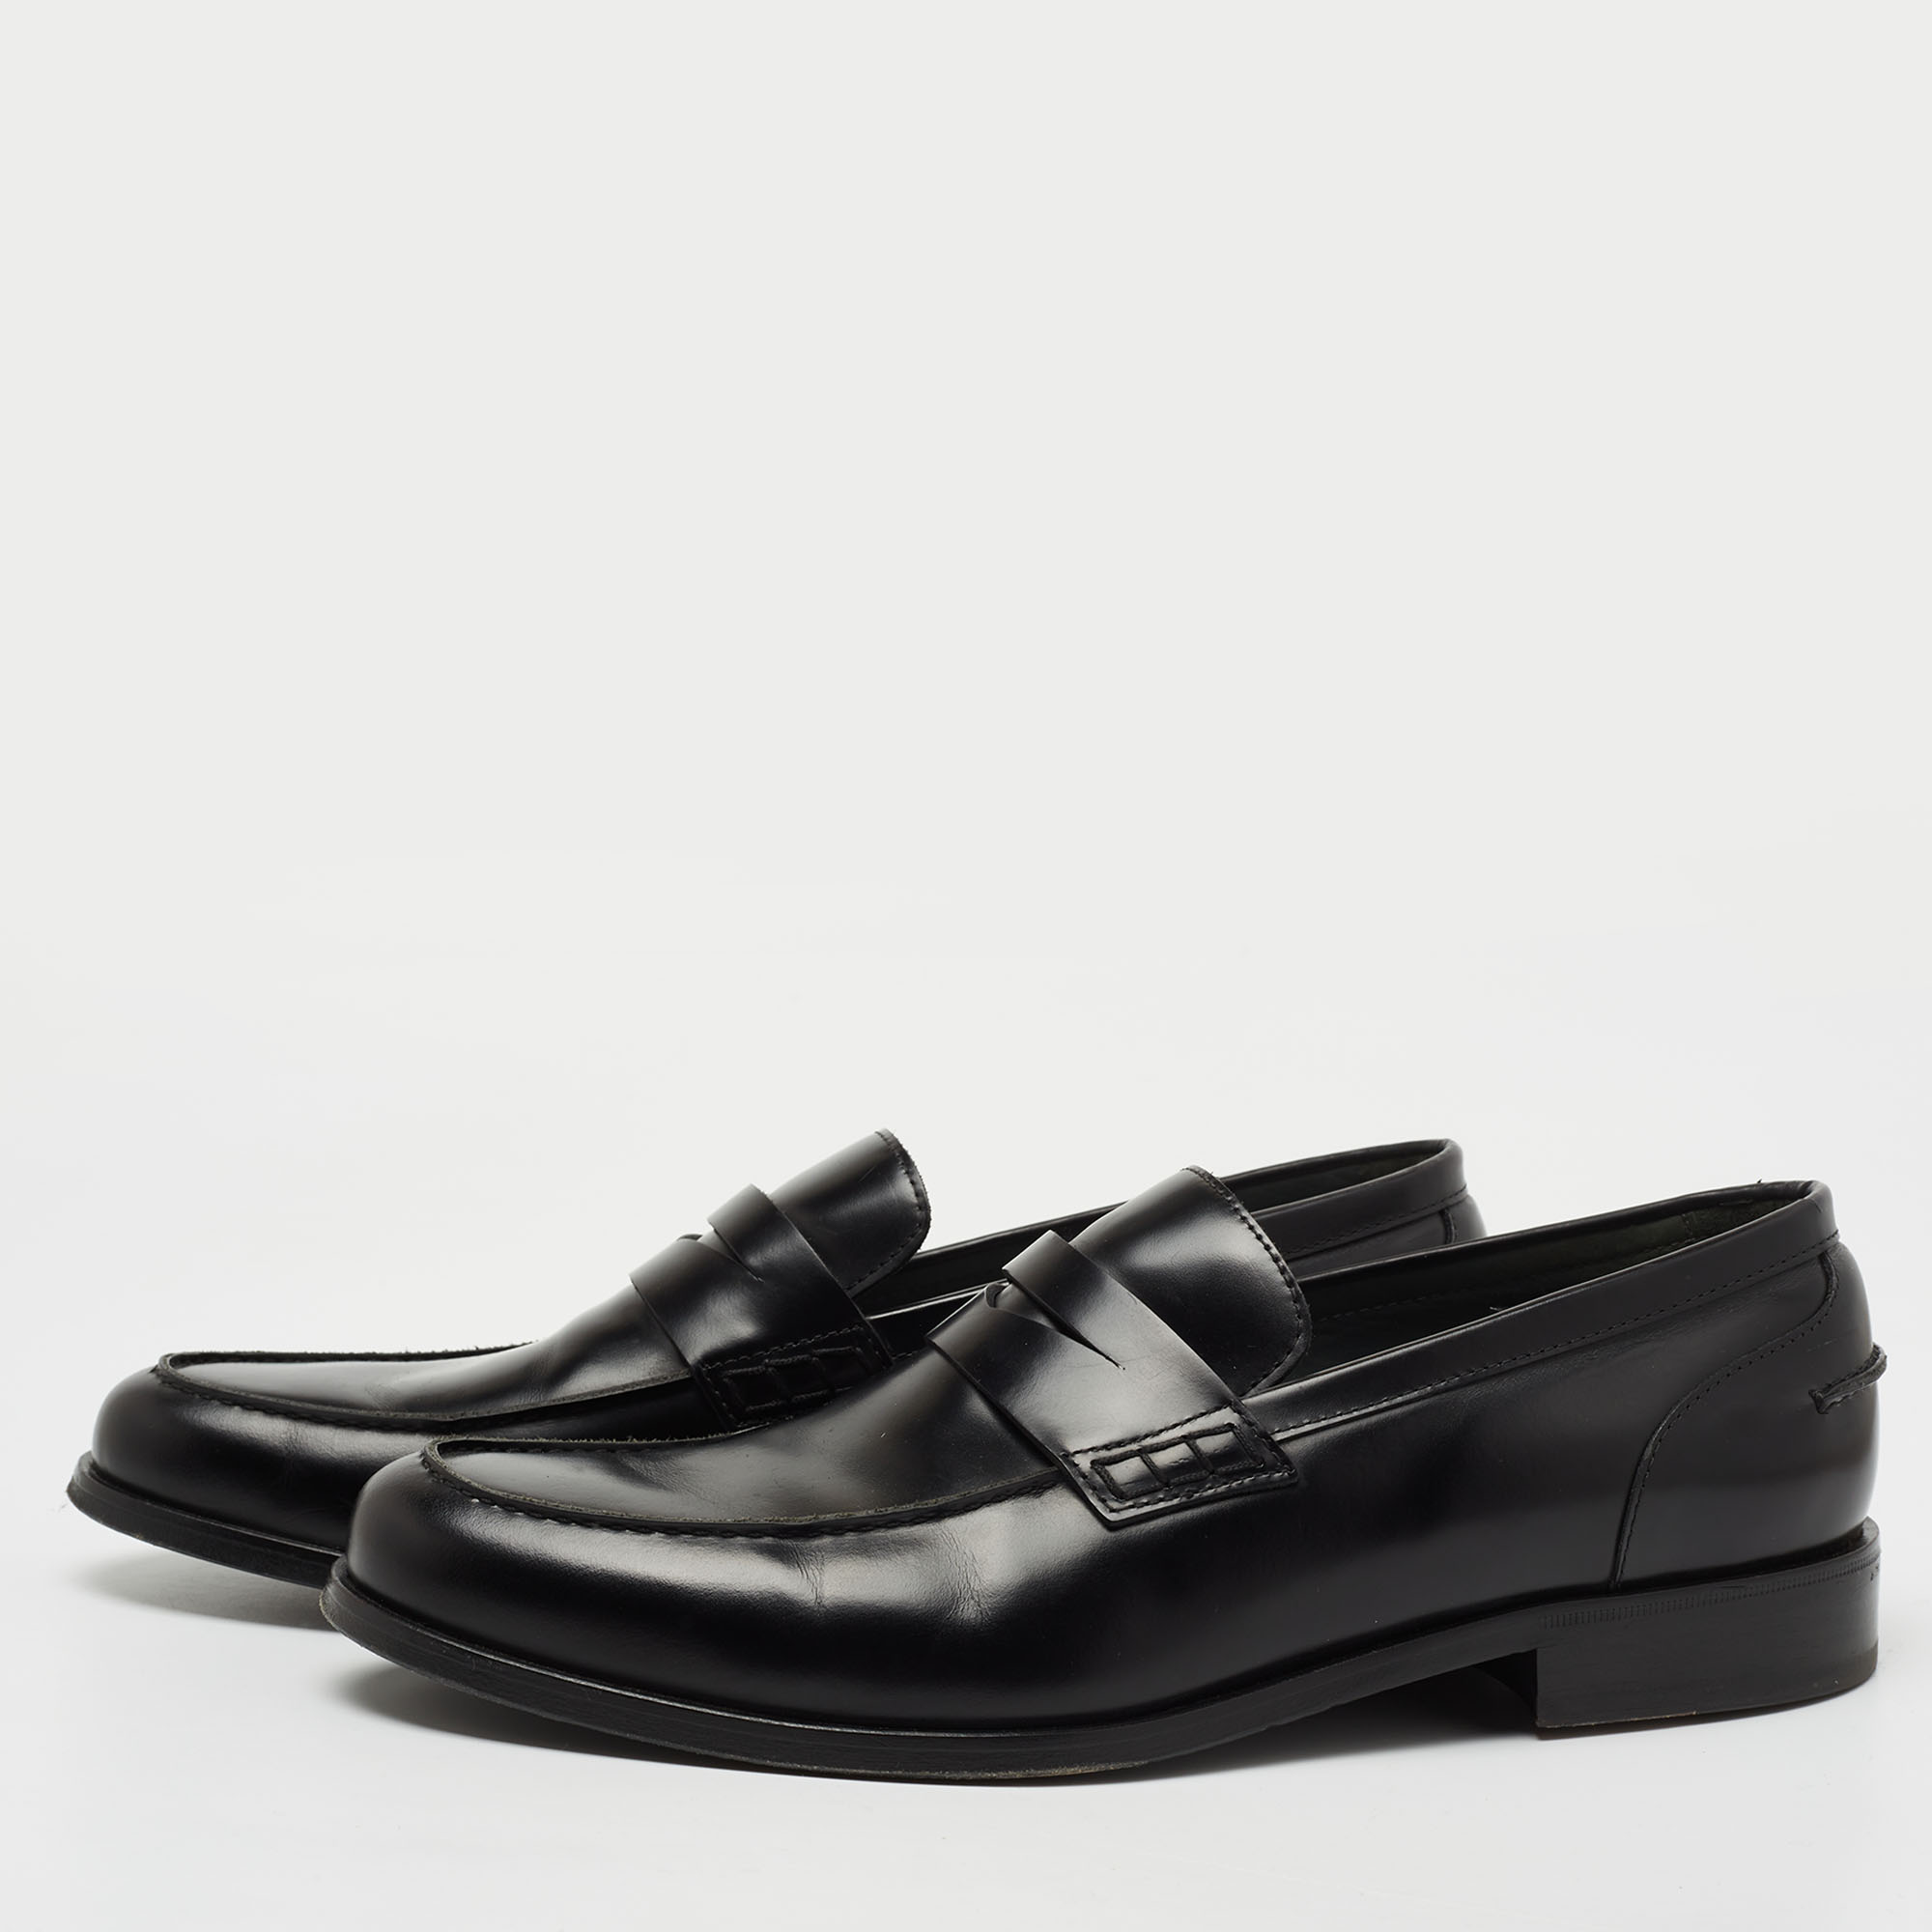 

Lanvin Black Leather Penny Loafers Size